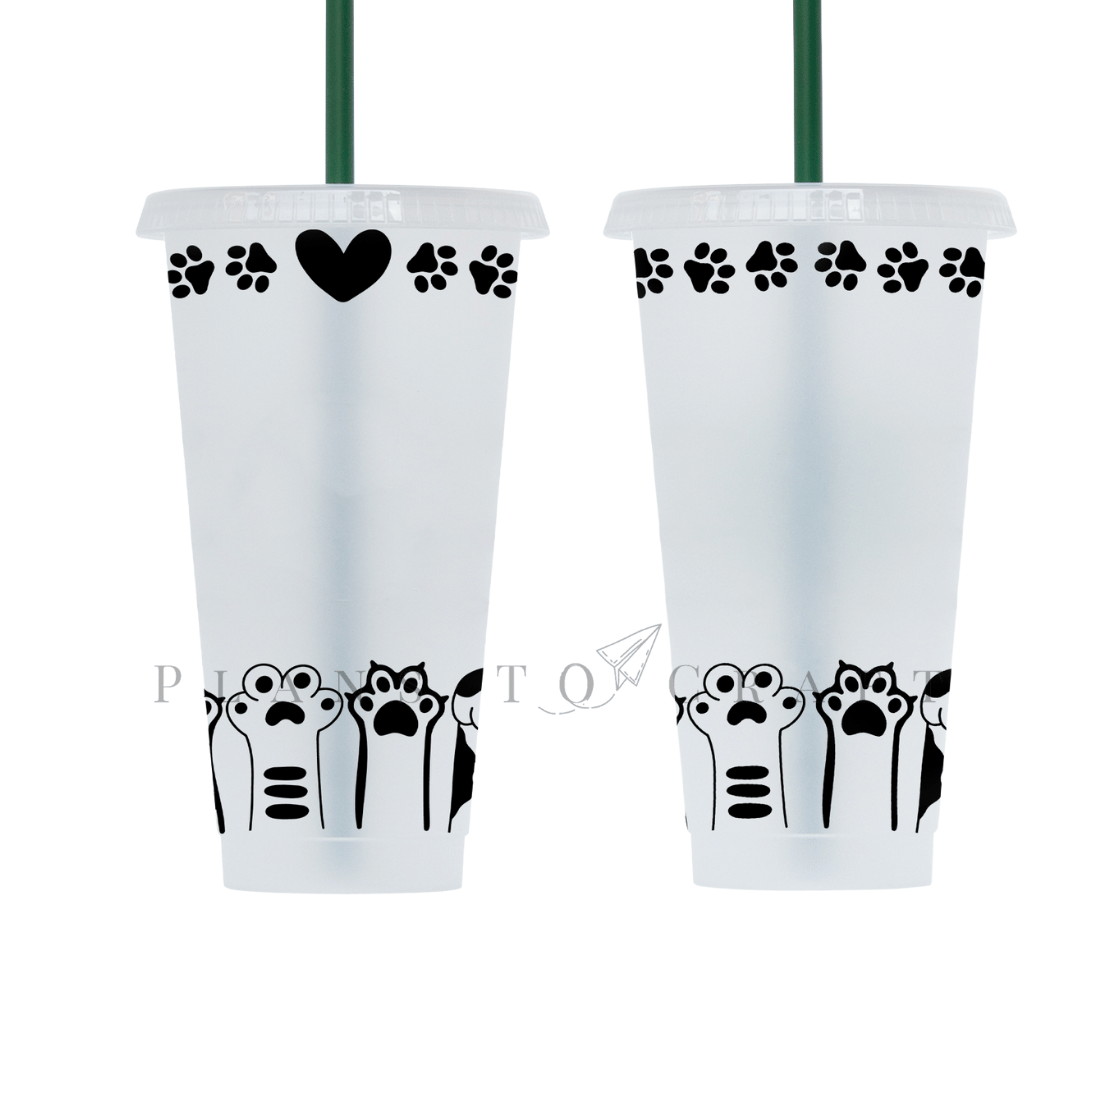 Two white cups with black designs on them.